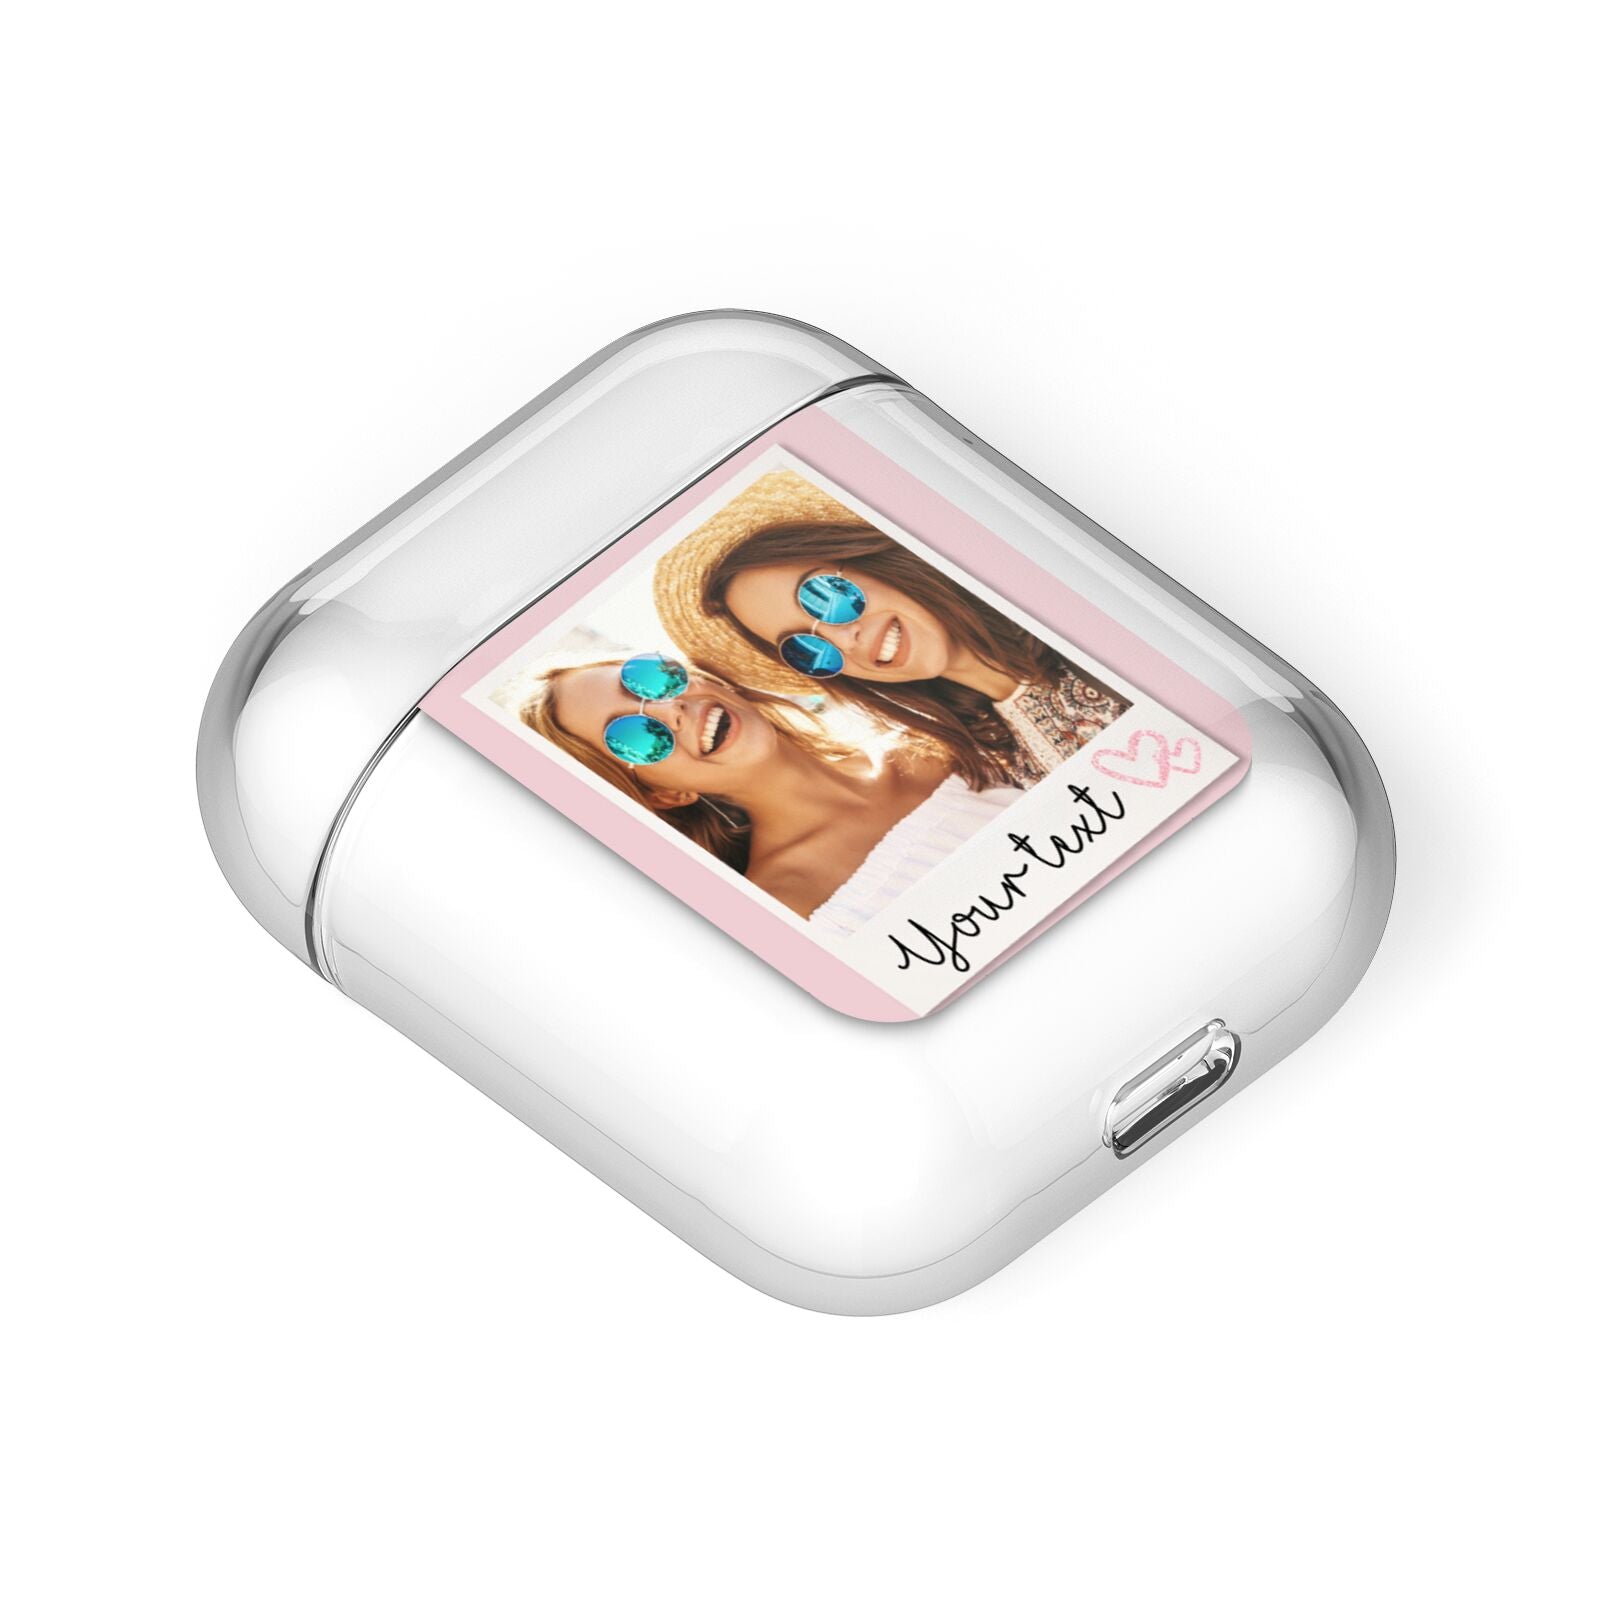 Personalised Best Friend Photo AirPods Case Laid Flat